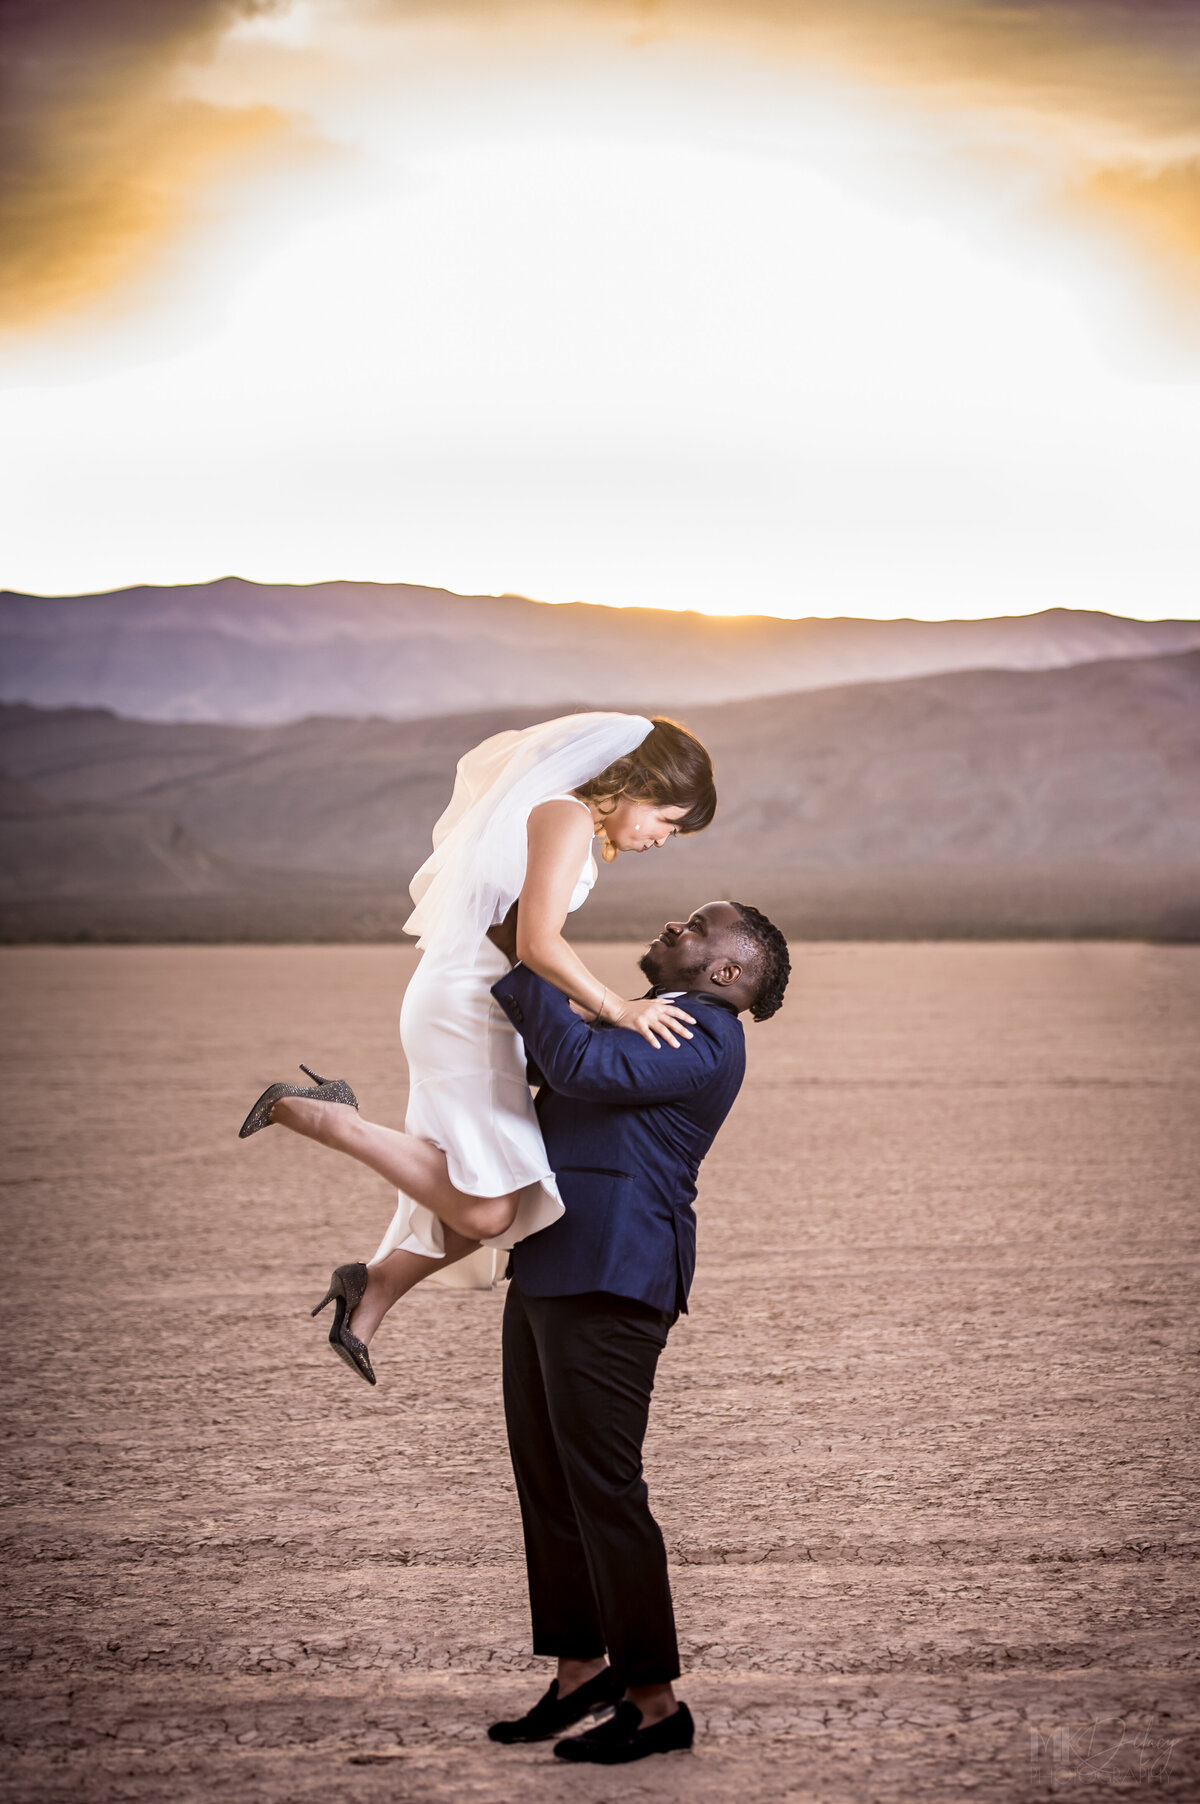 Groom lift his new bride up in the air las vegas elopement on the dry lake bed  at golden hour groom in blue suit jacket and black  pants  las vegas elopement eloping in vegas  las vegas wedding photographers las vegas wedding photography mk delacy photography